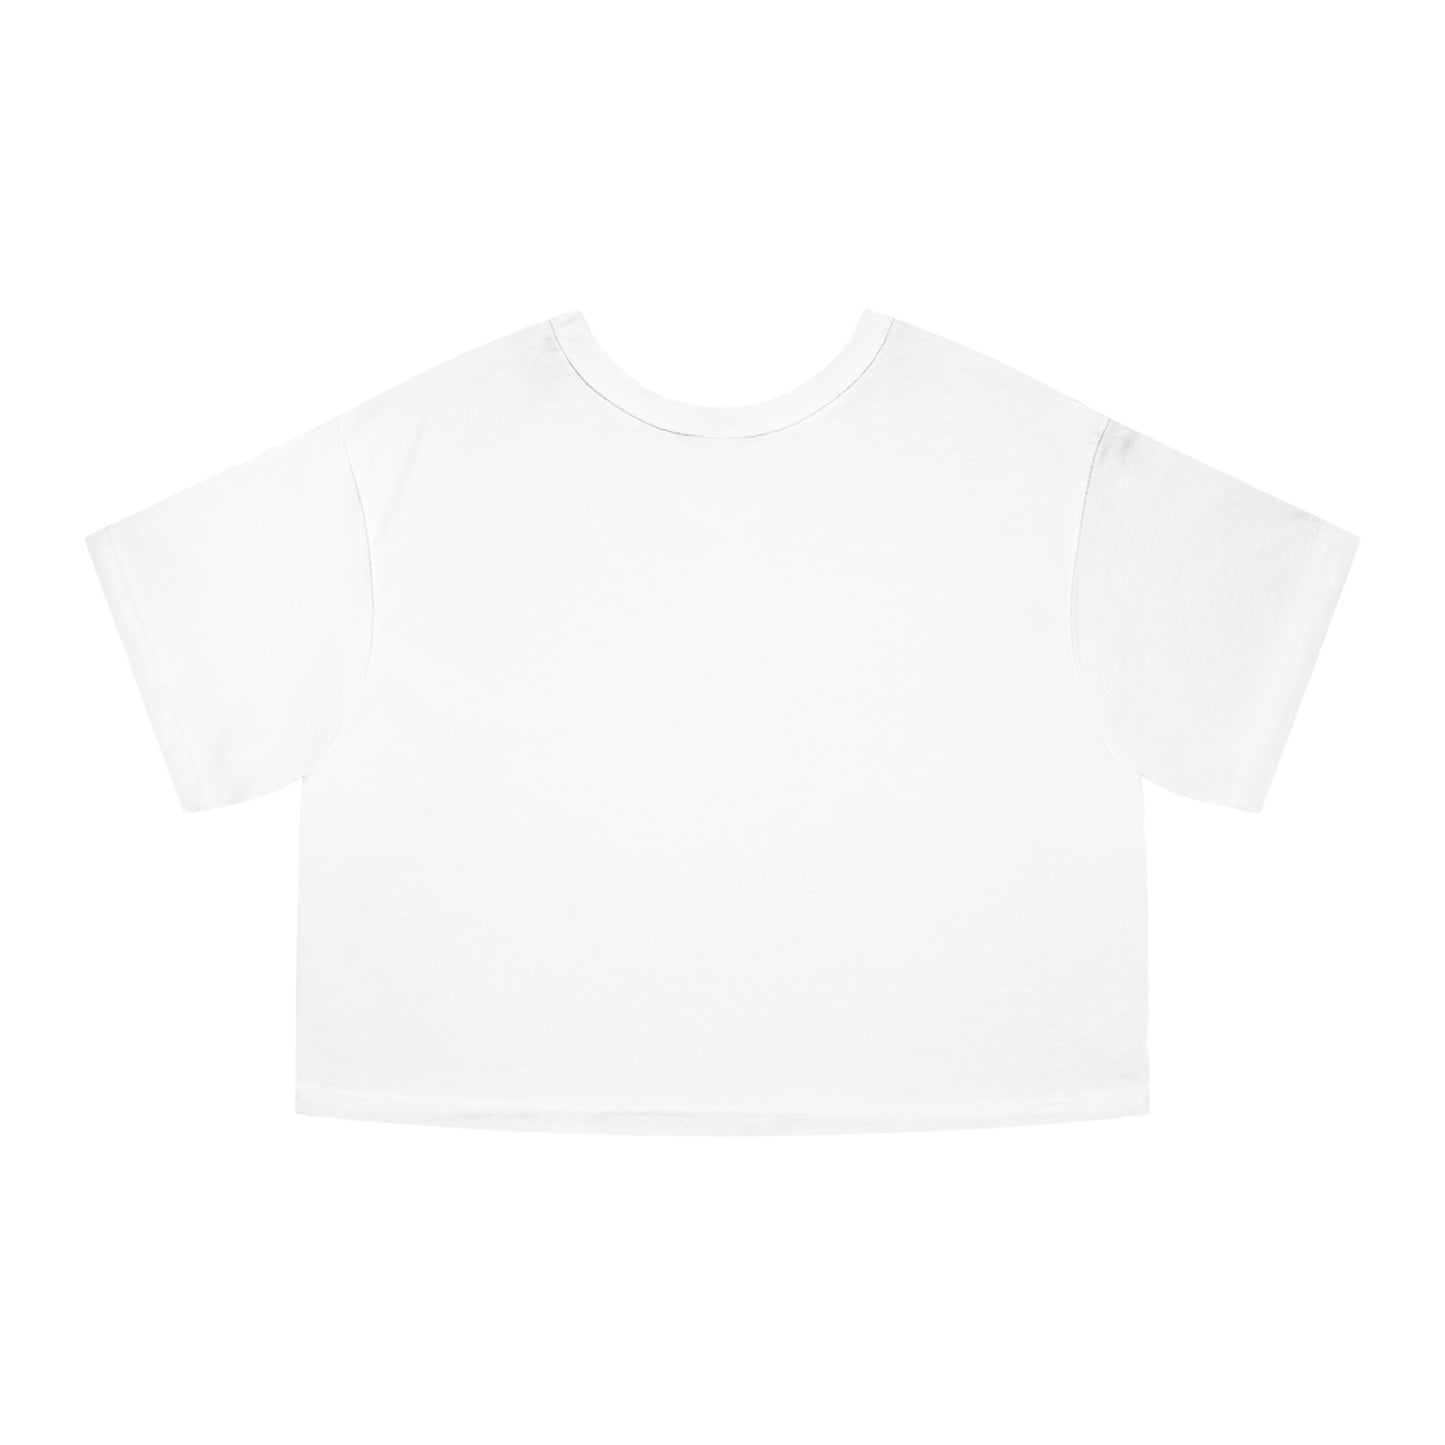 Stiky Astro Cropped T-Shirt